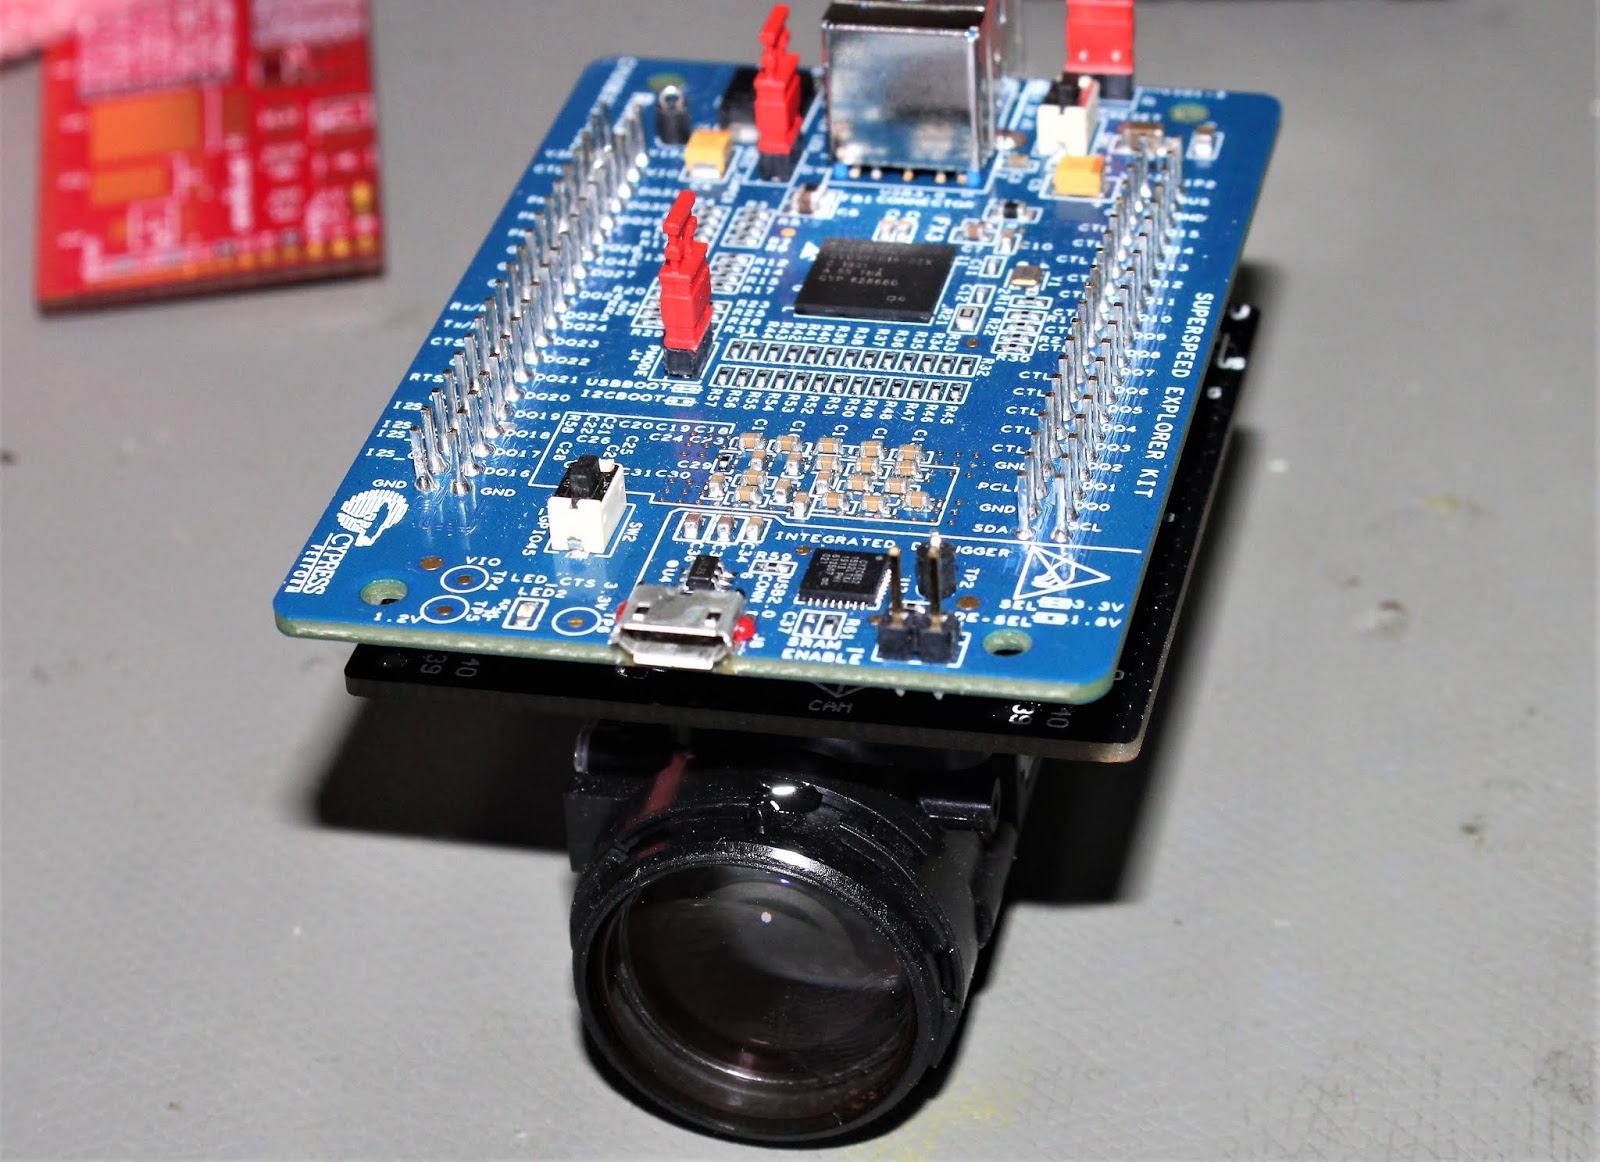 Embedded Engineering : DIY USB 3.0 1080p Full HD Camera with Auto Focus and 10x Optical zoom, 1Gbps Streaming Over FX3 USB3.0